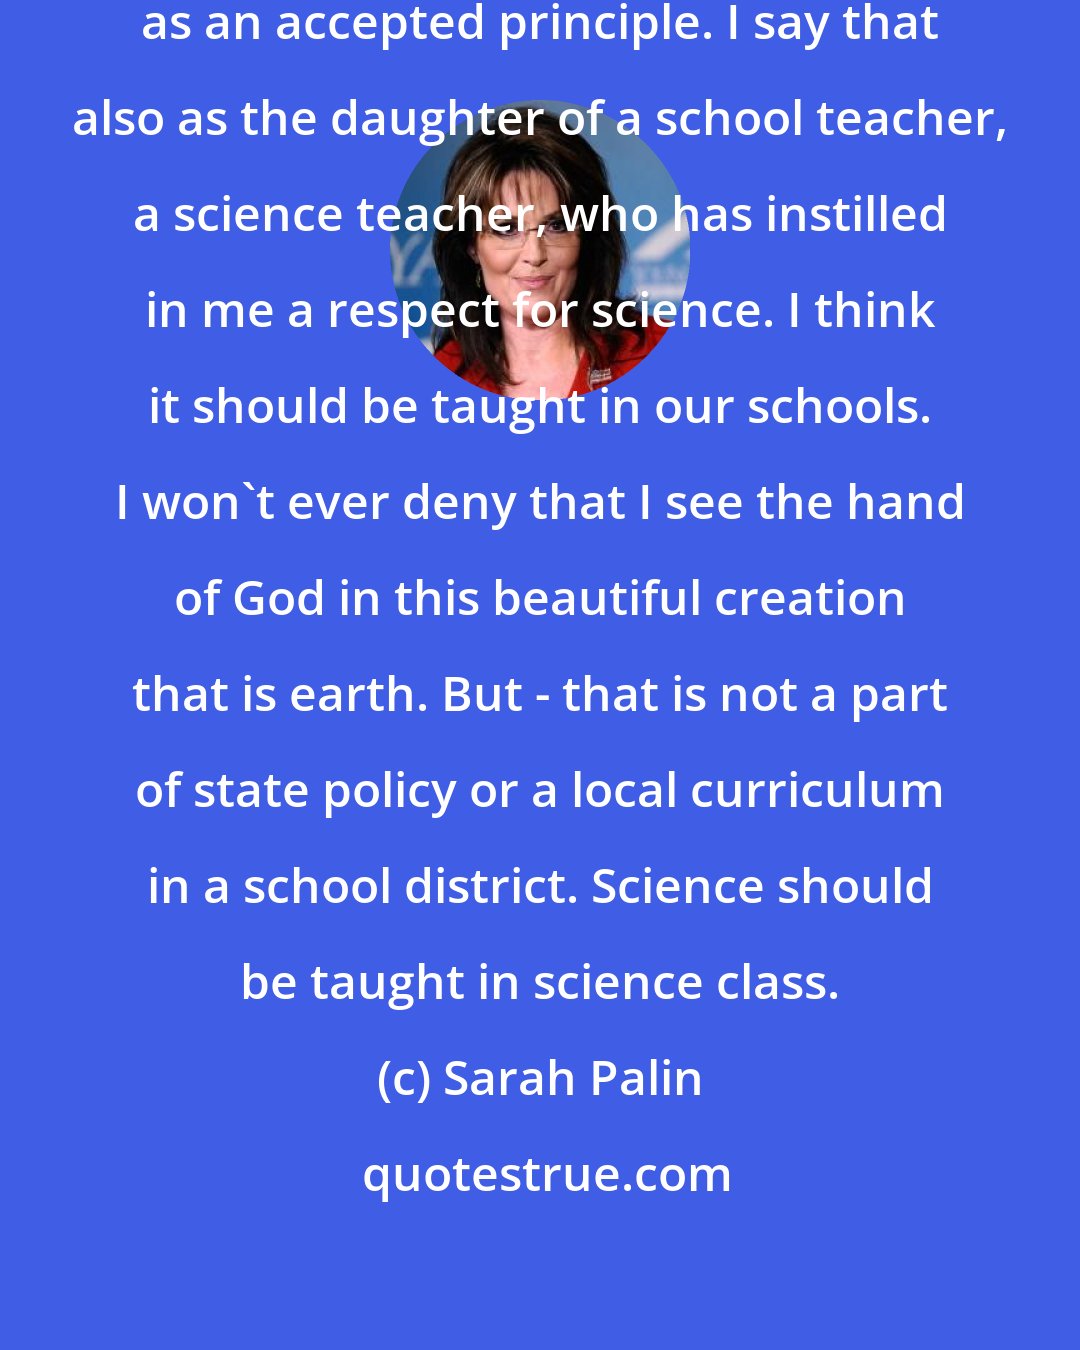 Sarah Palin: I think evolution should be taught as an accepted principle. I say that also as the daughter of a school teacher, a science teacher, who has instilled in me a respect for science. I think it should be taught in our schools. I won't ever deny that I see the hand of God in this beautiful creation that is earth. But - that is not a part of state policy or a local curriculum in a school district. Science should be taught in science class.